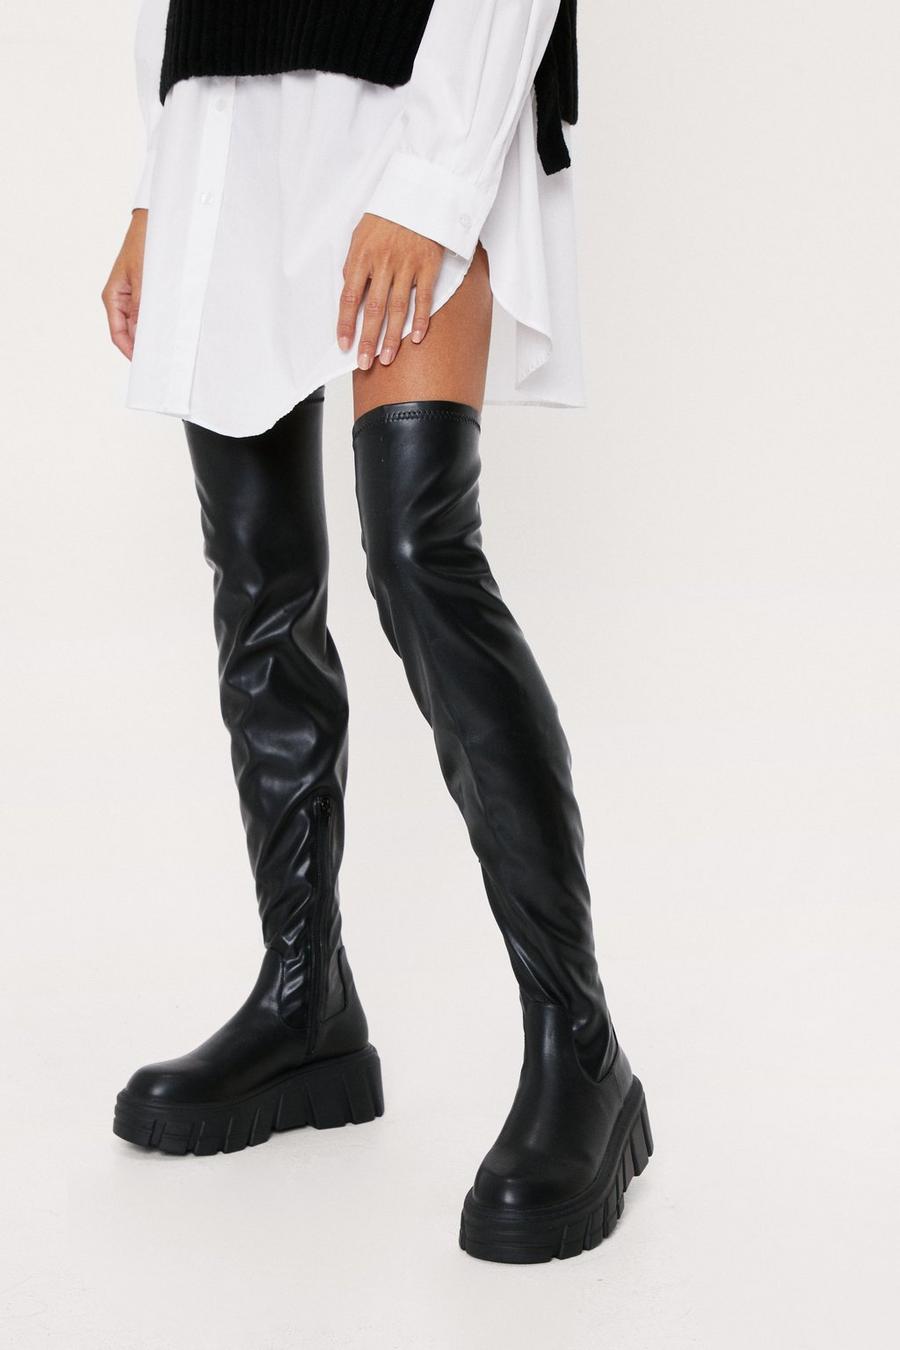 11 Best Over-the-Knee Boots For Wide Calves HuffPost Life | vlr.eng.br